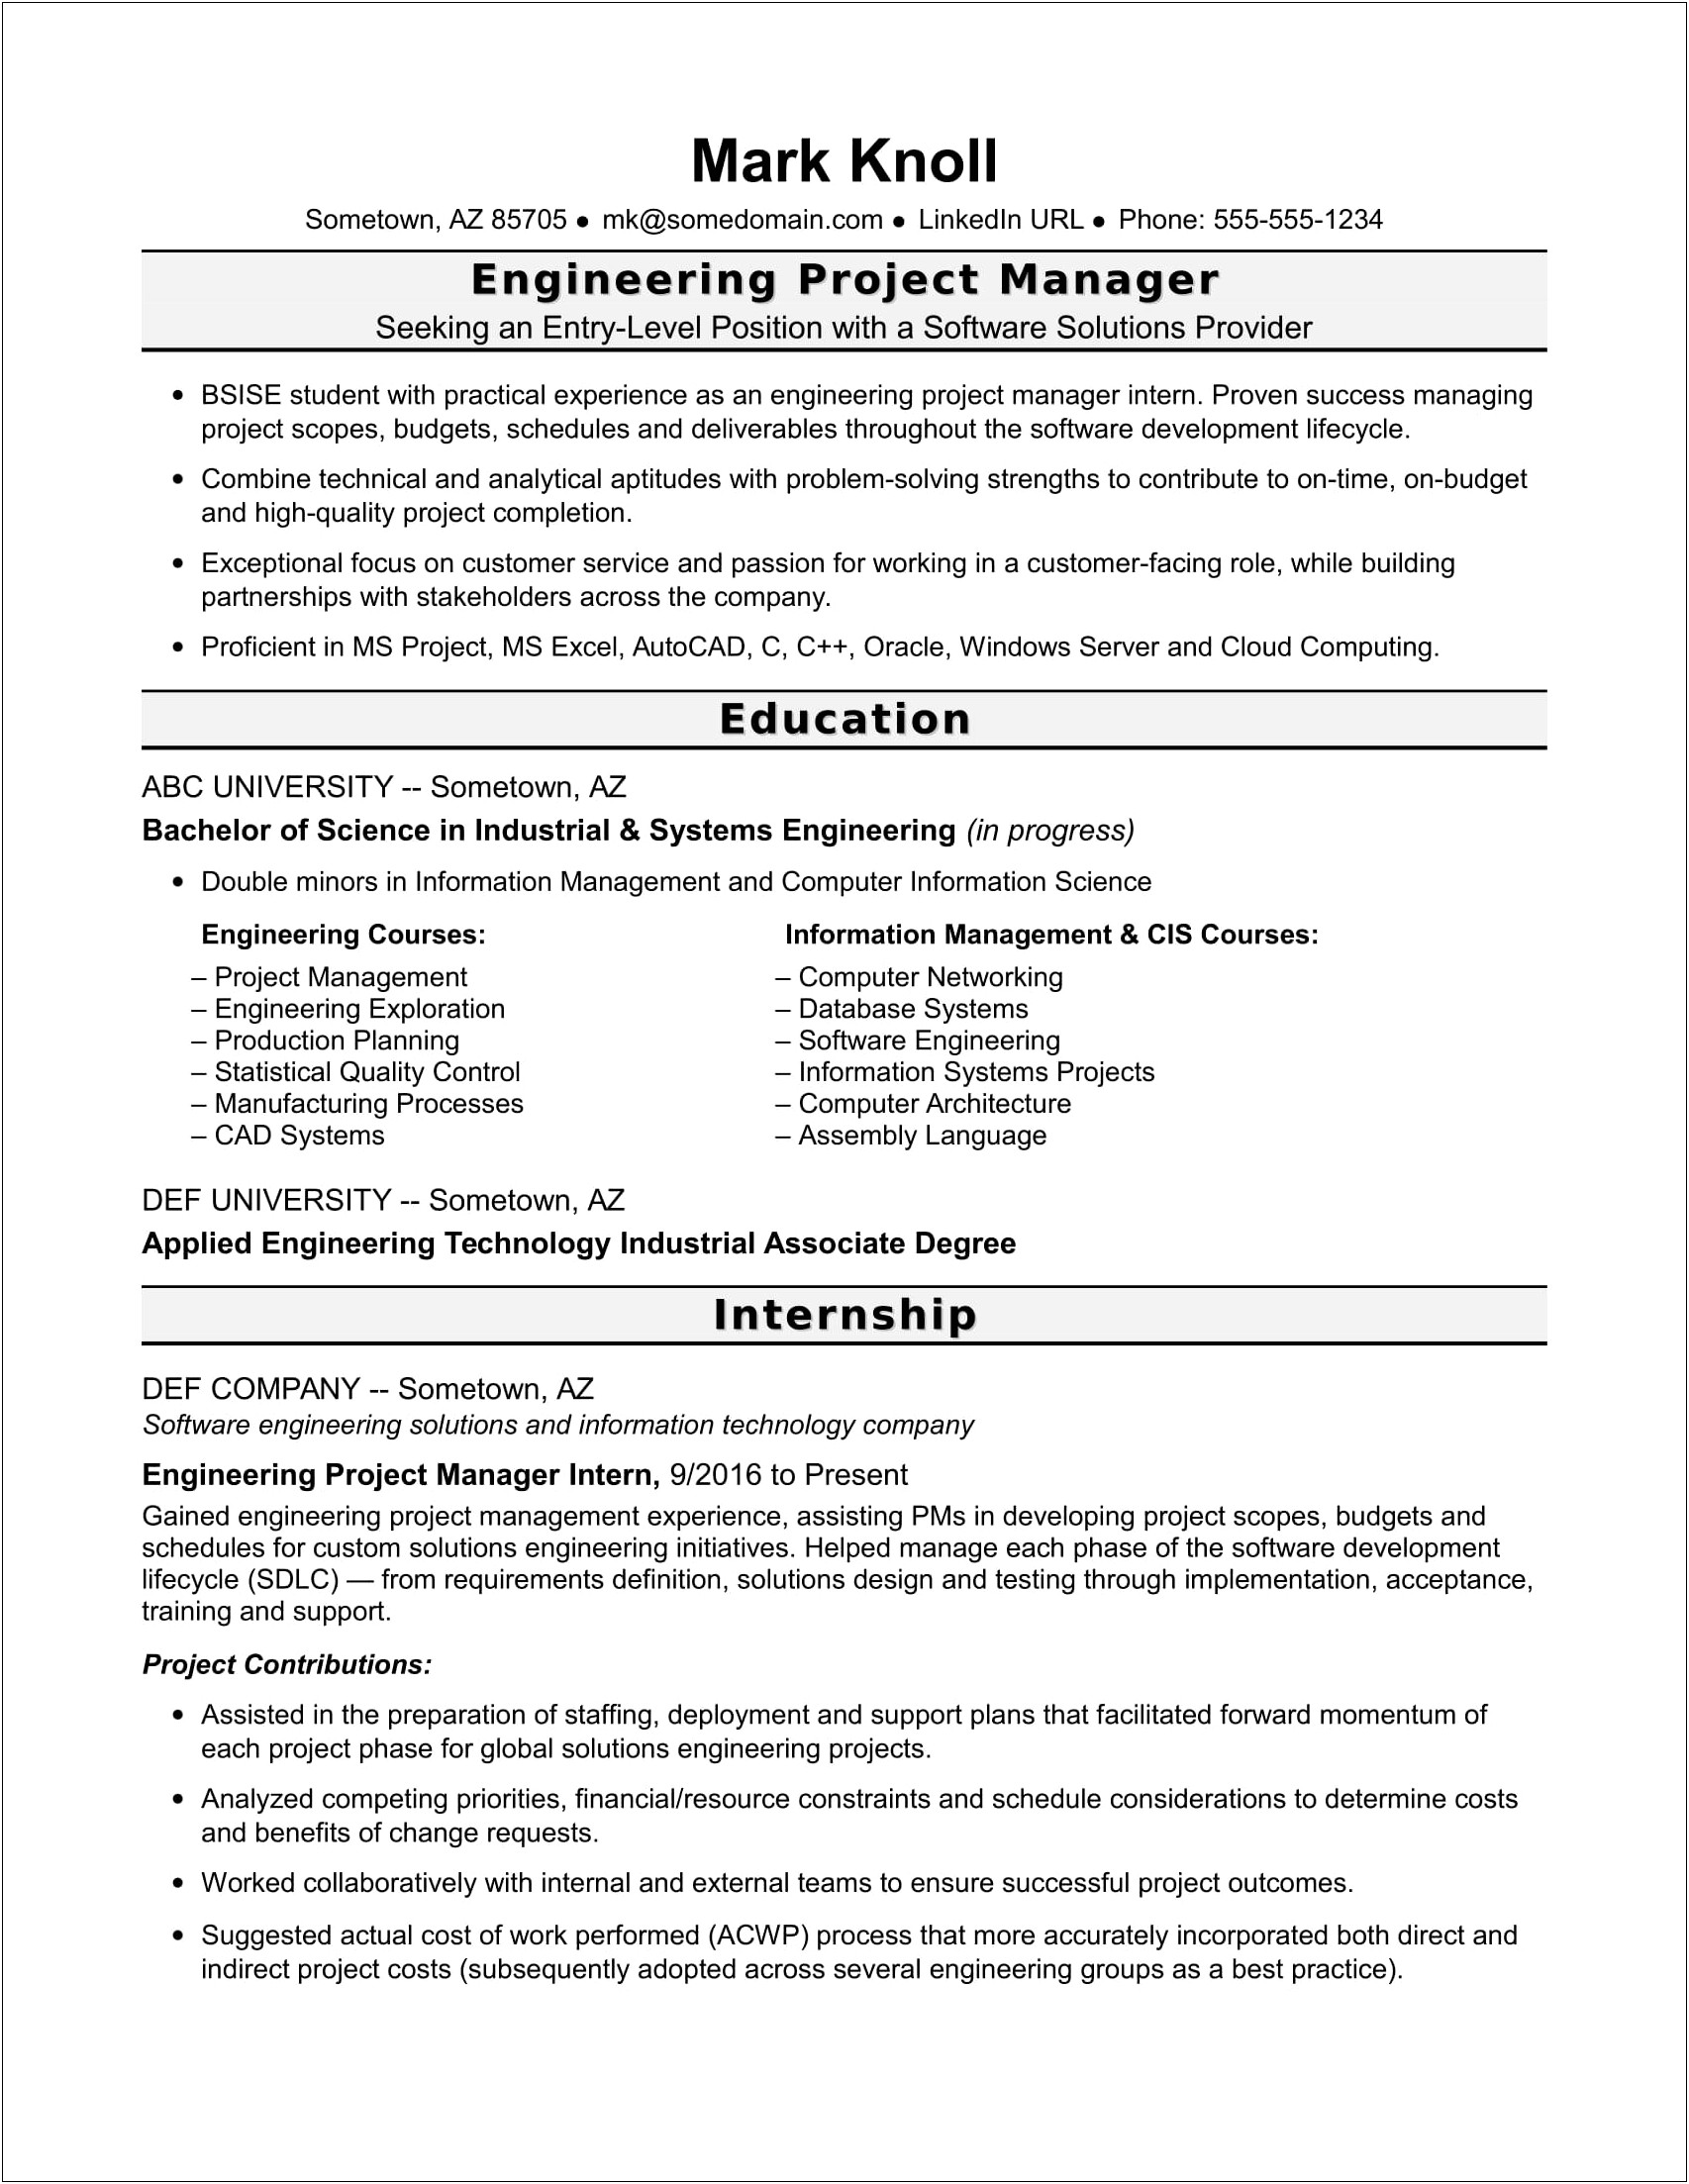 Example Resume For Project Management Assistant